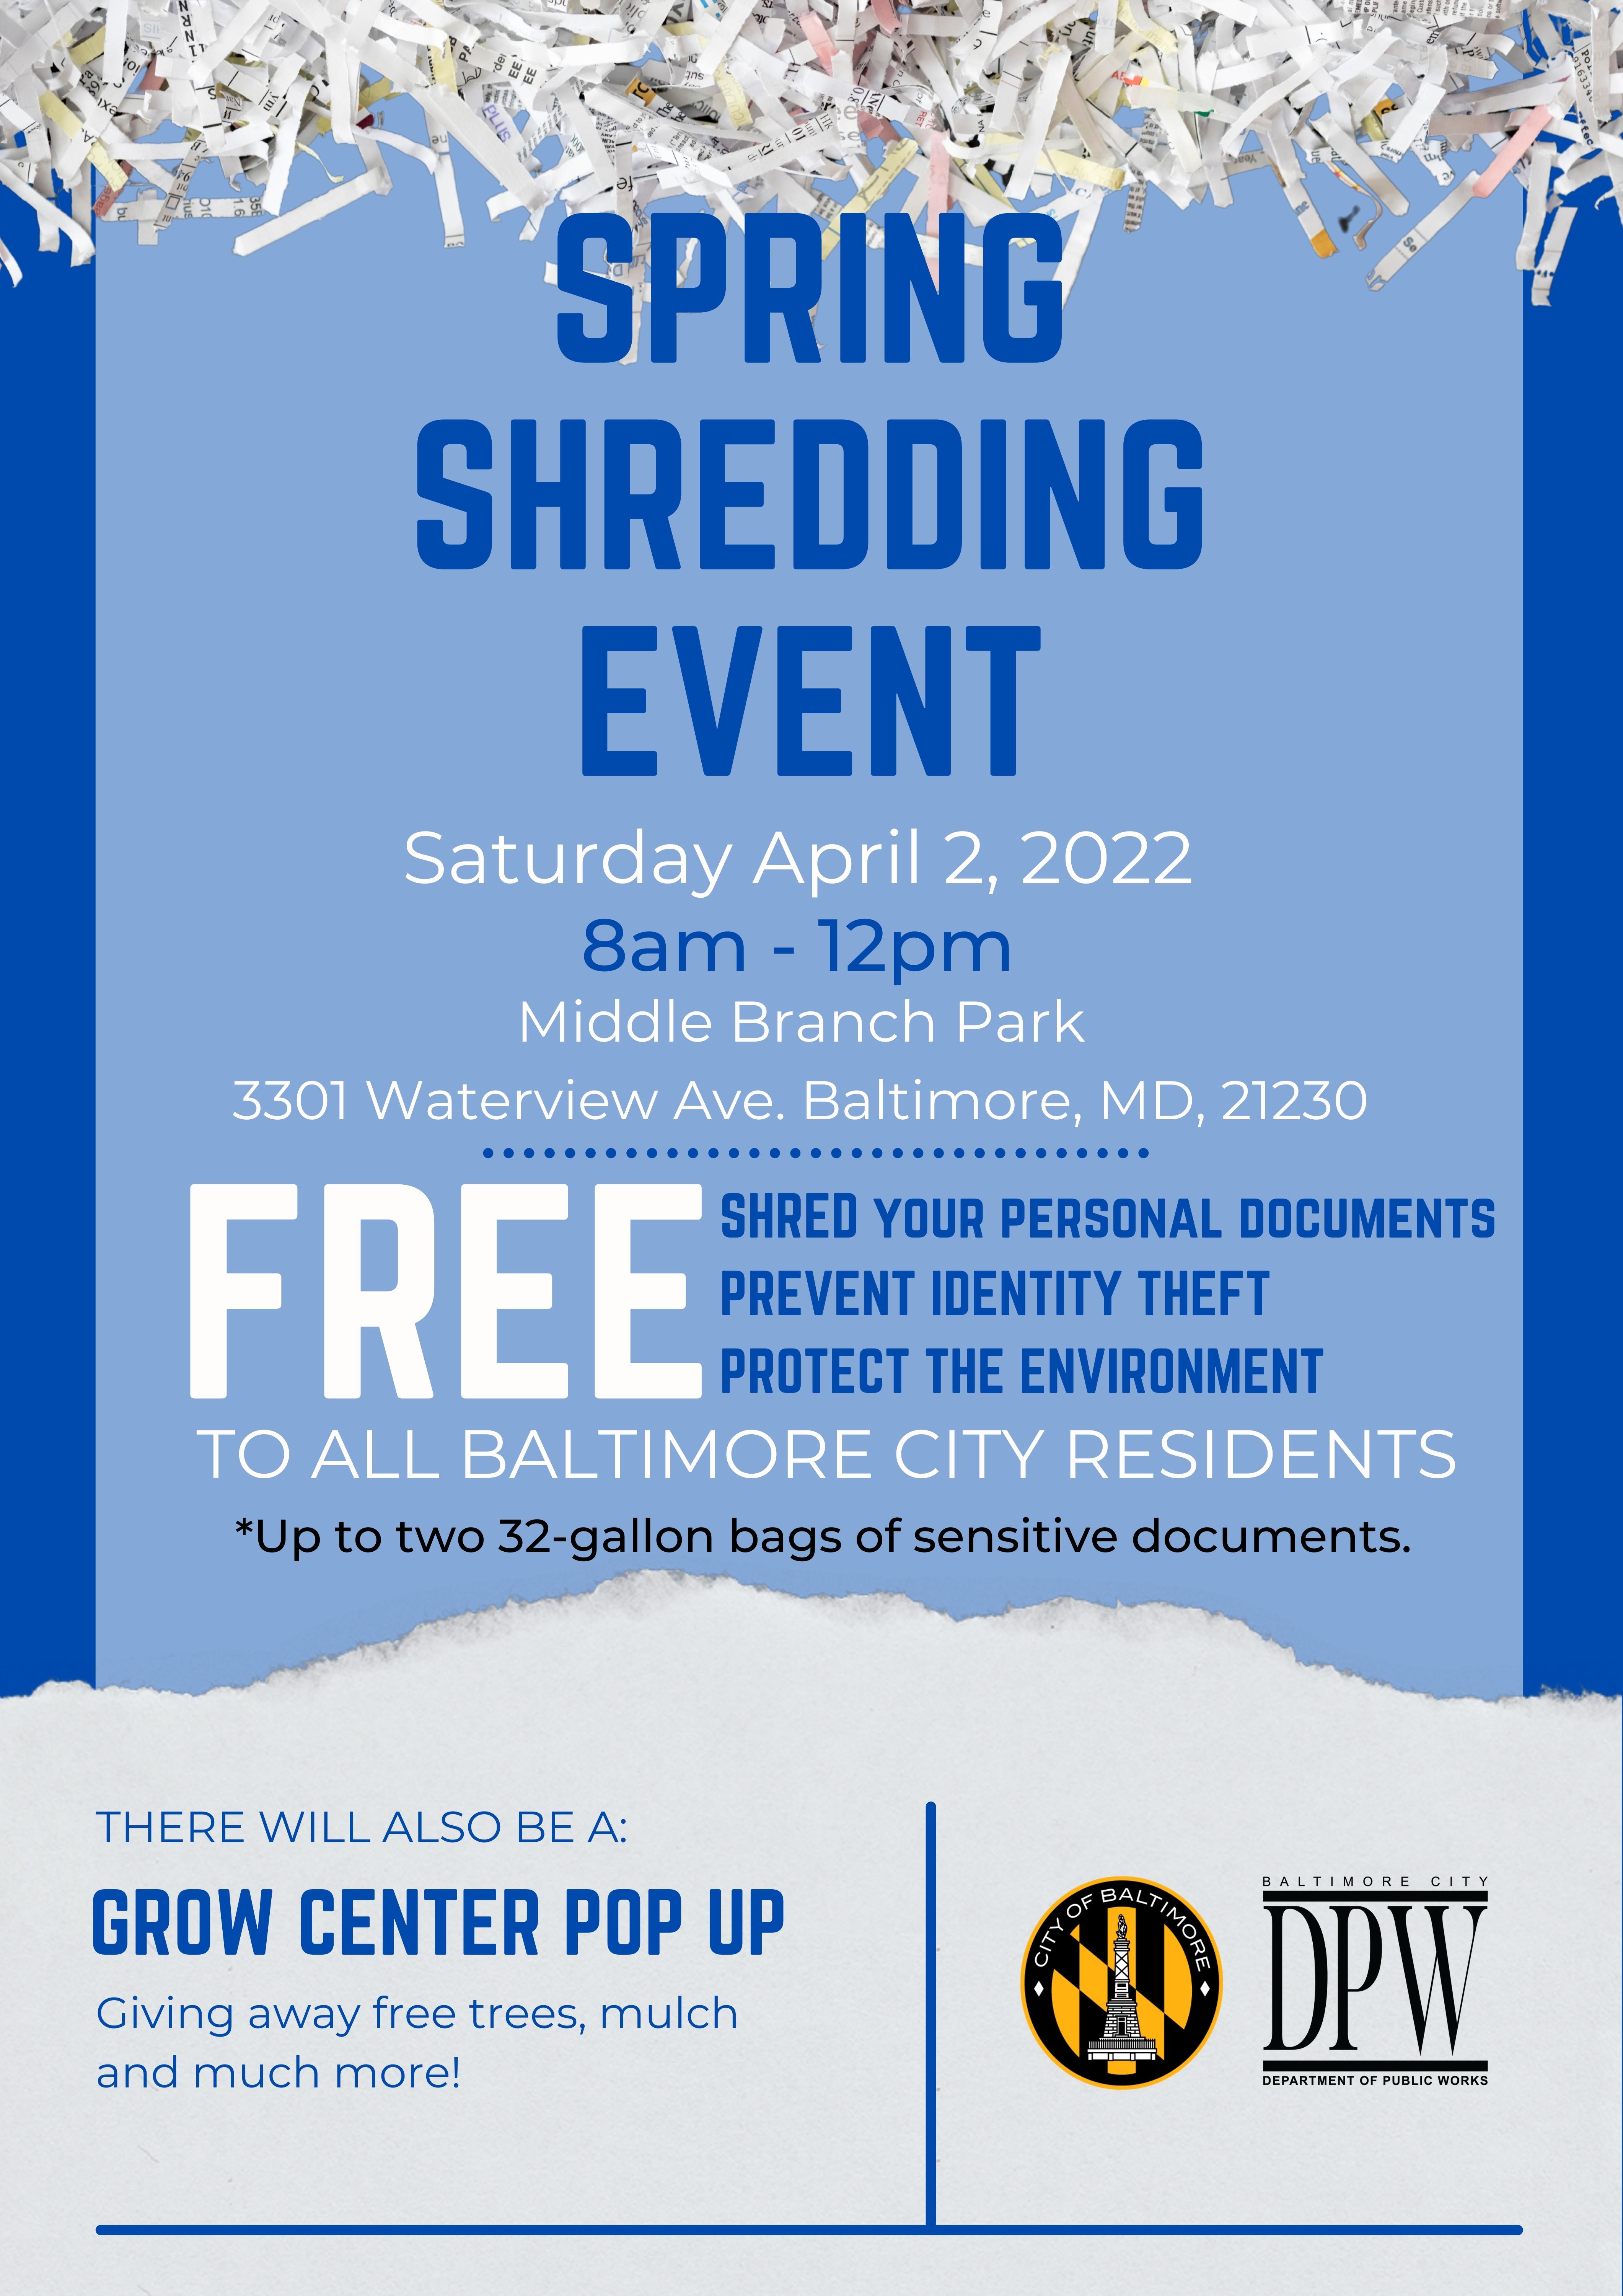 Spring Shred/GROW Event | Baltimore City Department of Public Works